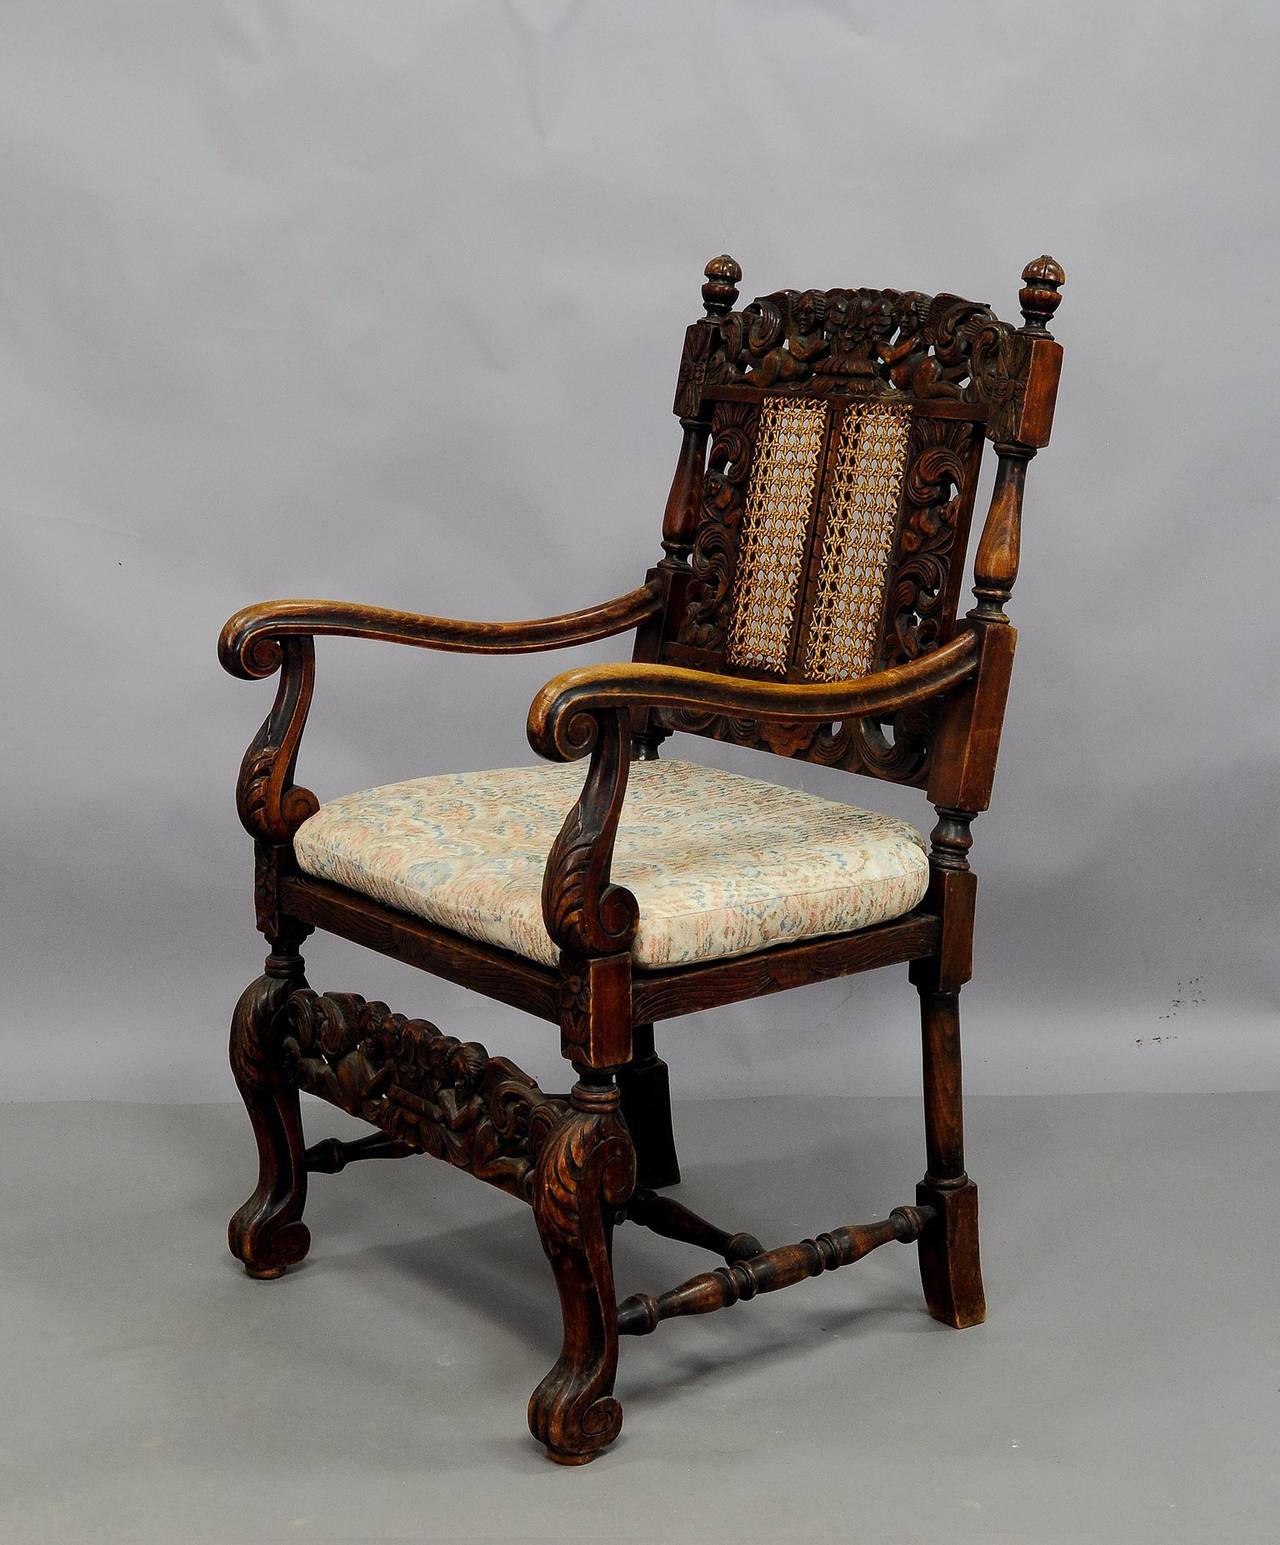 Renaissance Pair of Carved Wood Armchairs with Great Cherub Carvings, circa 1900